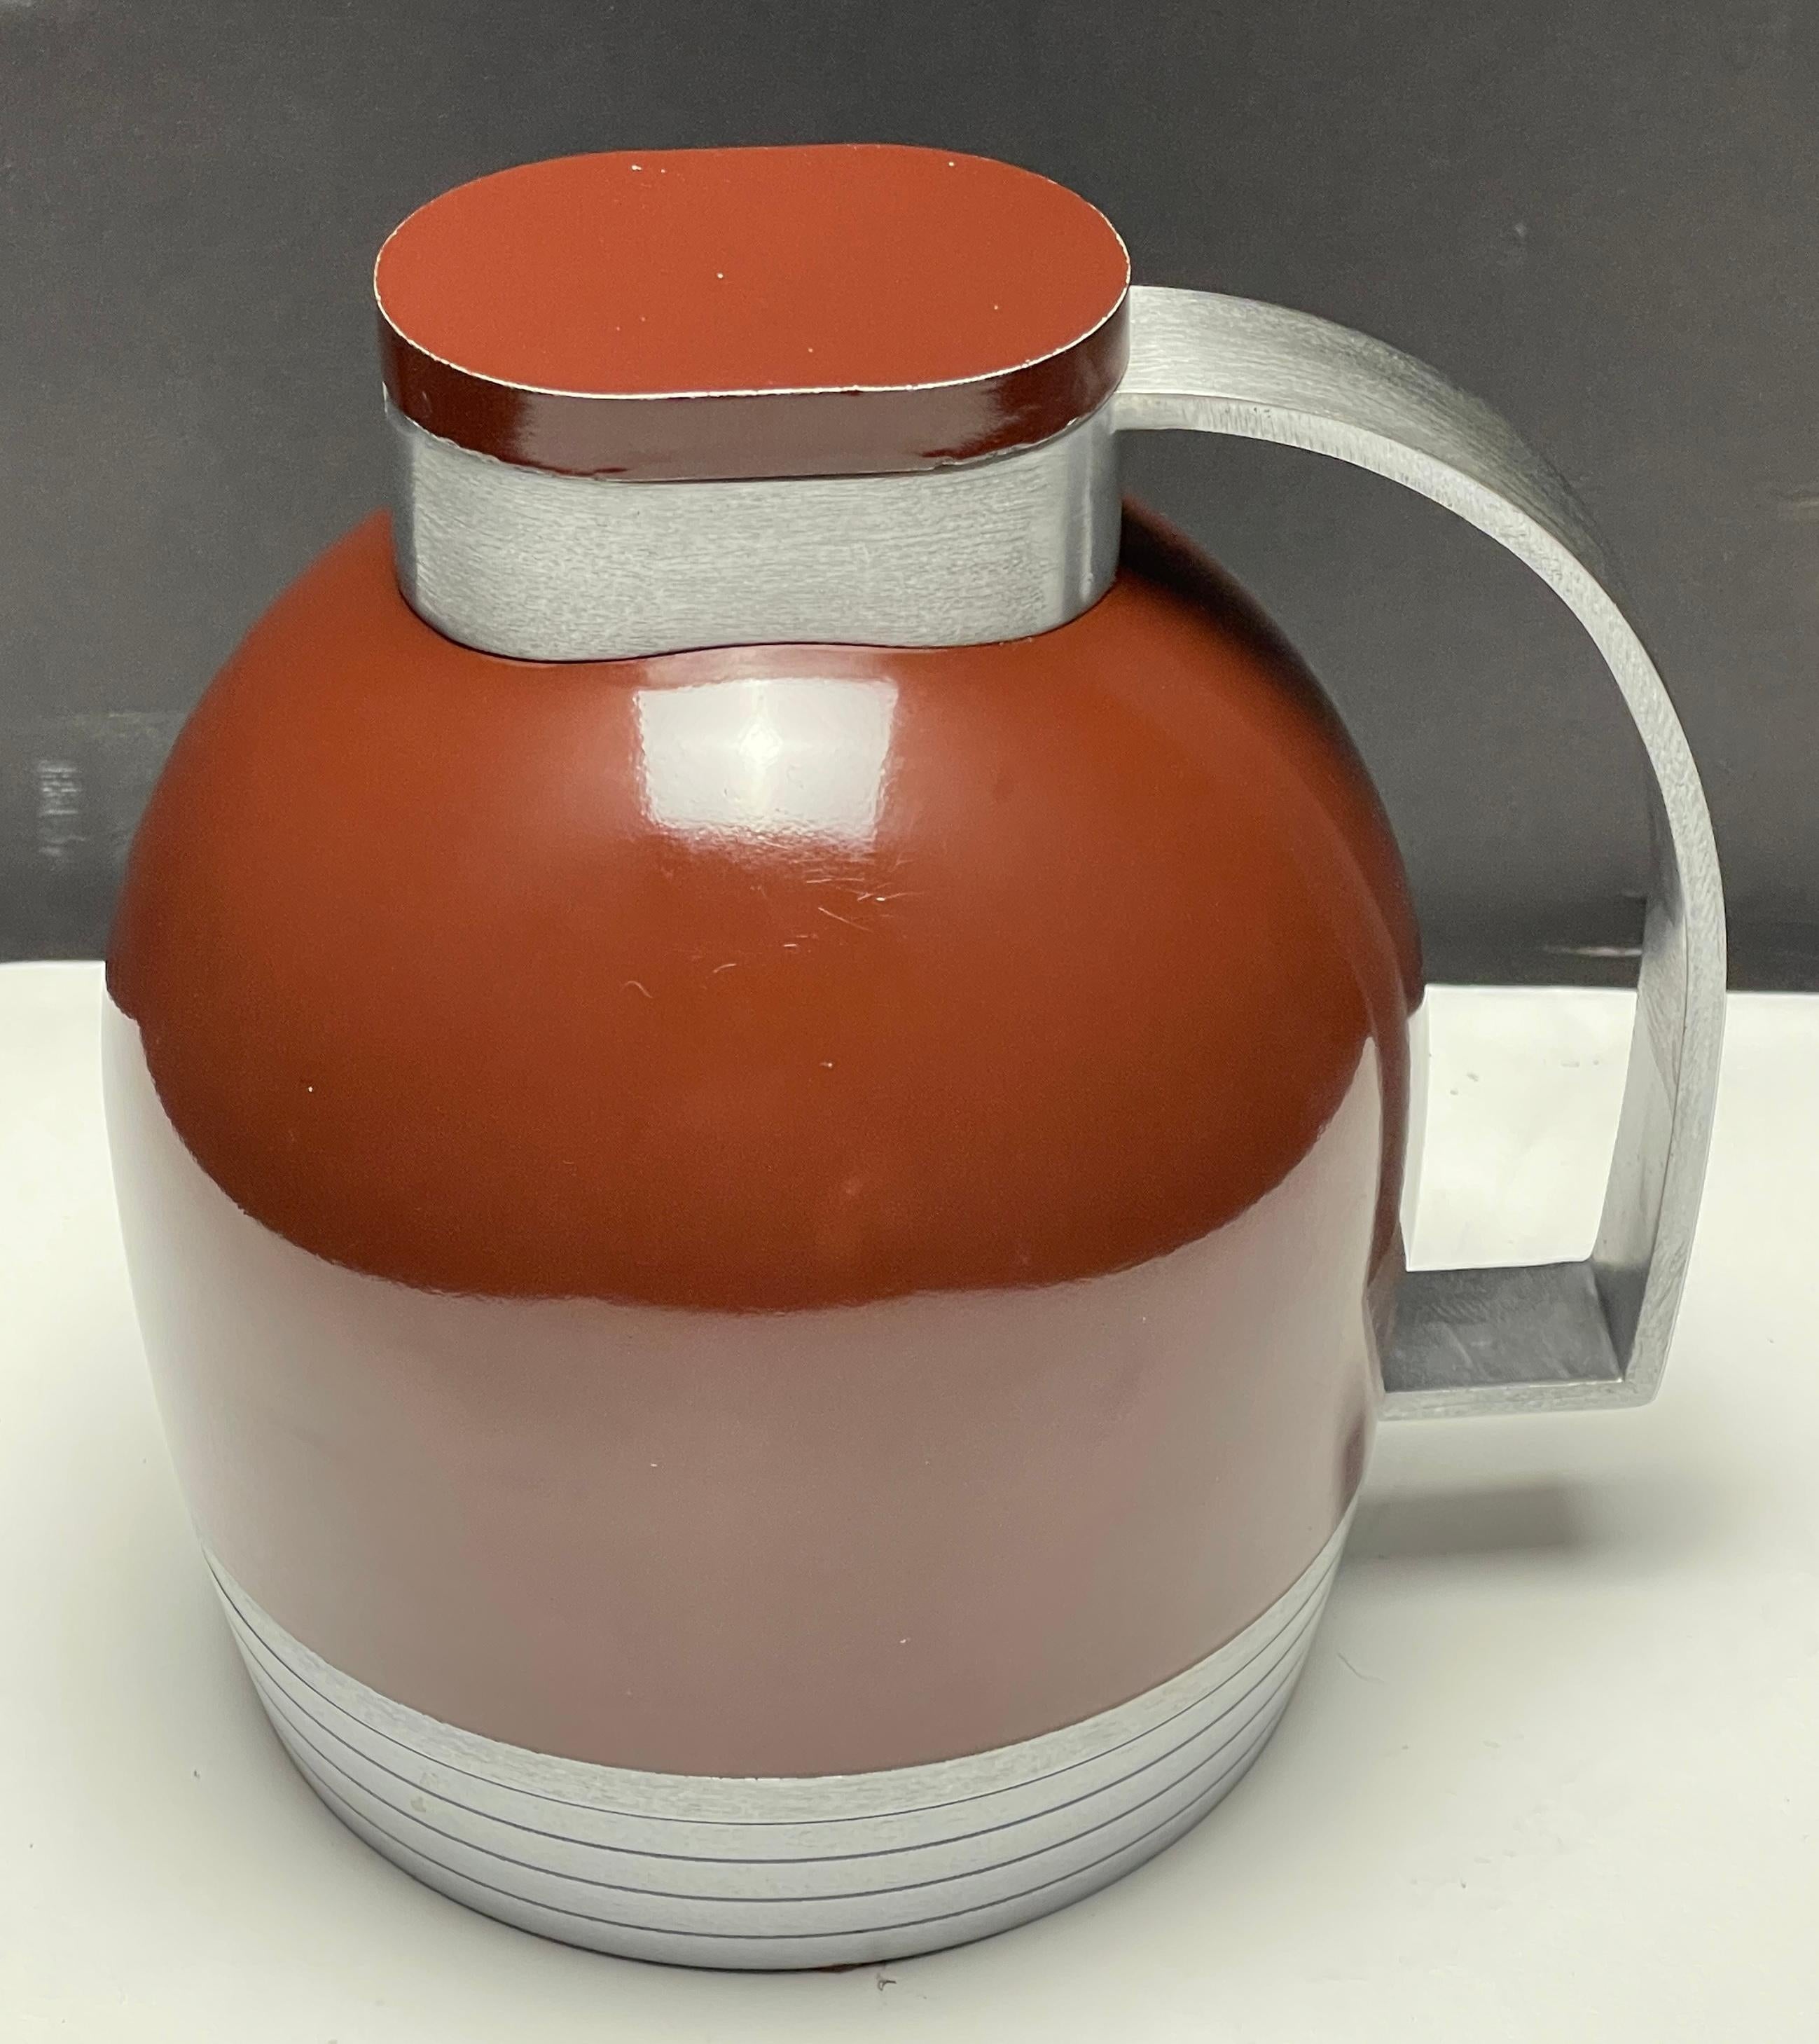 Thermos carafe designed by Henry Dreyfuss for The American Thermos Bottle Company.
Henry Dreyfuss was an American industrial designer known for his streamlined designs for telephones, vacuum cleaners, typewriters, and other household items. He also